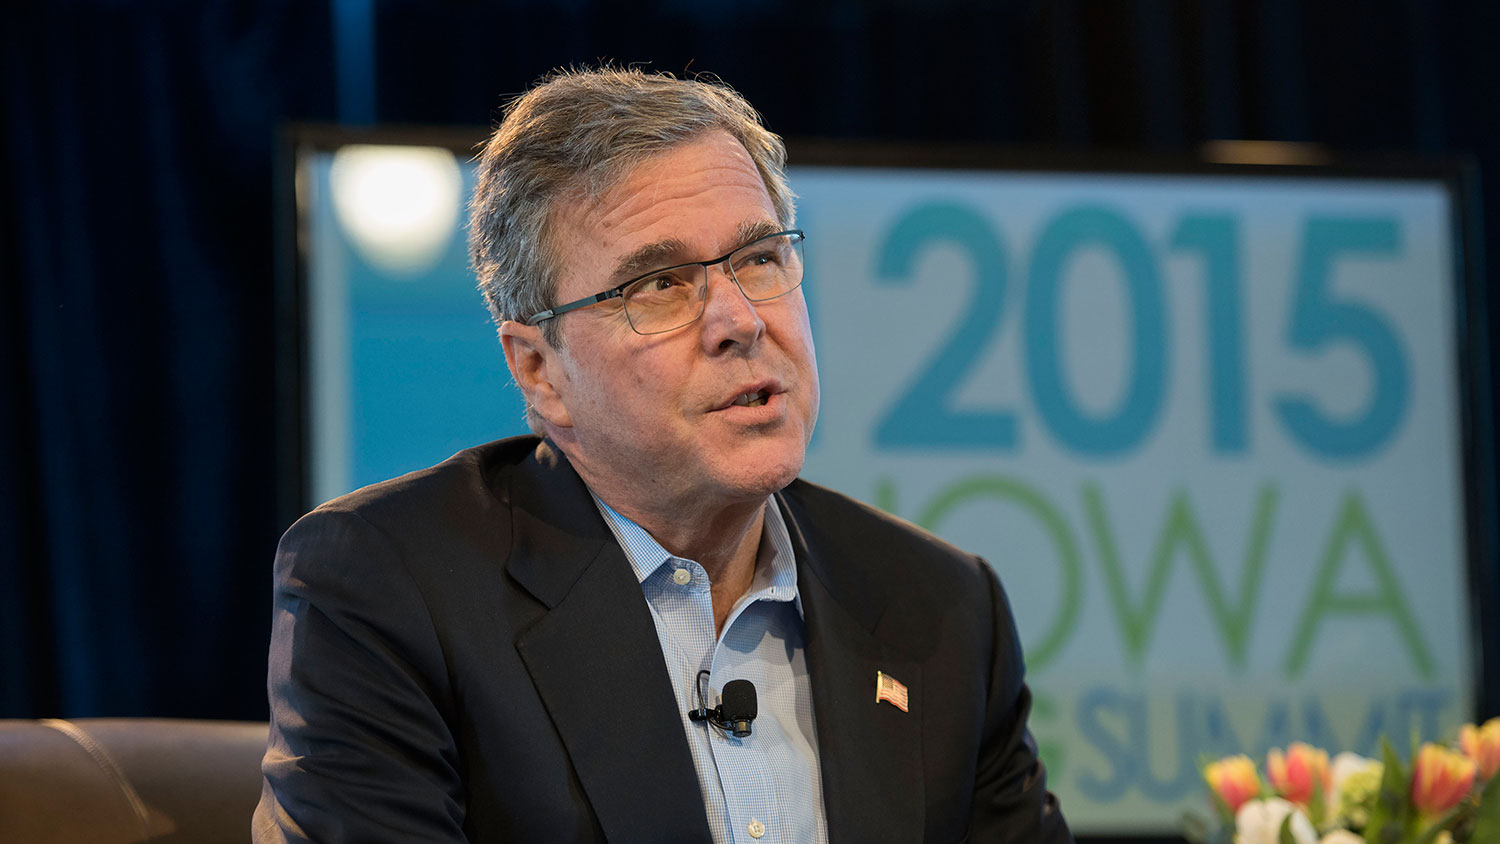 Jeb Bush, former governor of Florida, speaks during the Iowa Ag Summit at the Iowa State Fairgrounds in Des Moines, Iowa, U.S., on Saturday, March 7, 2015.
